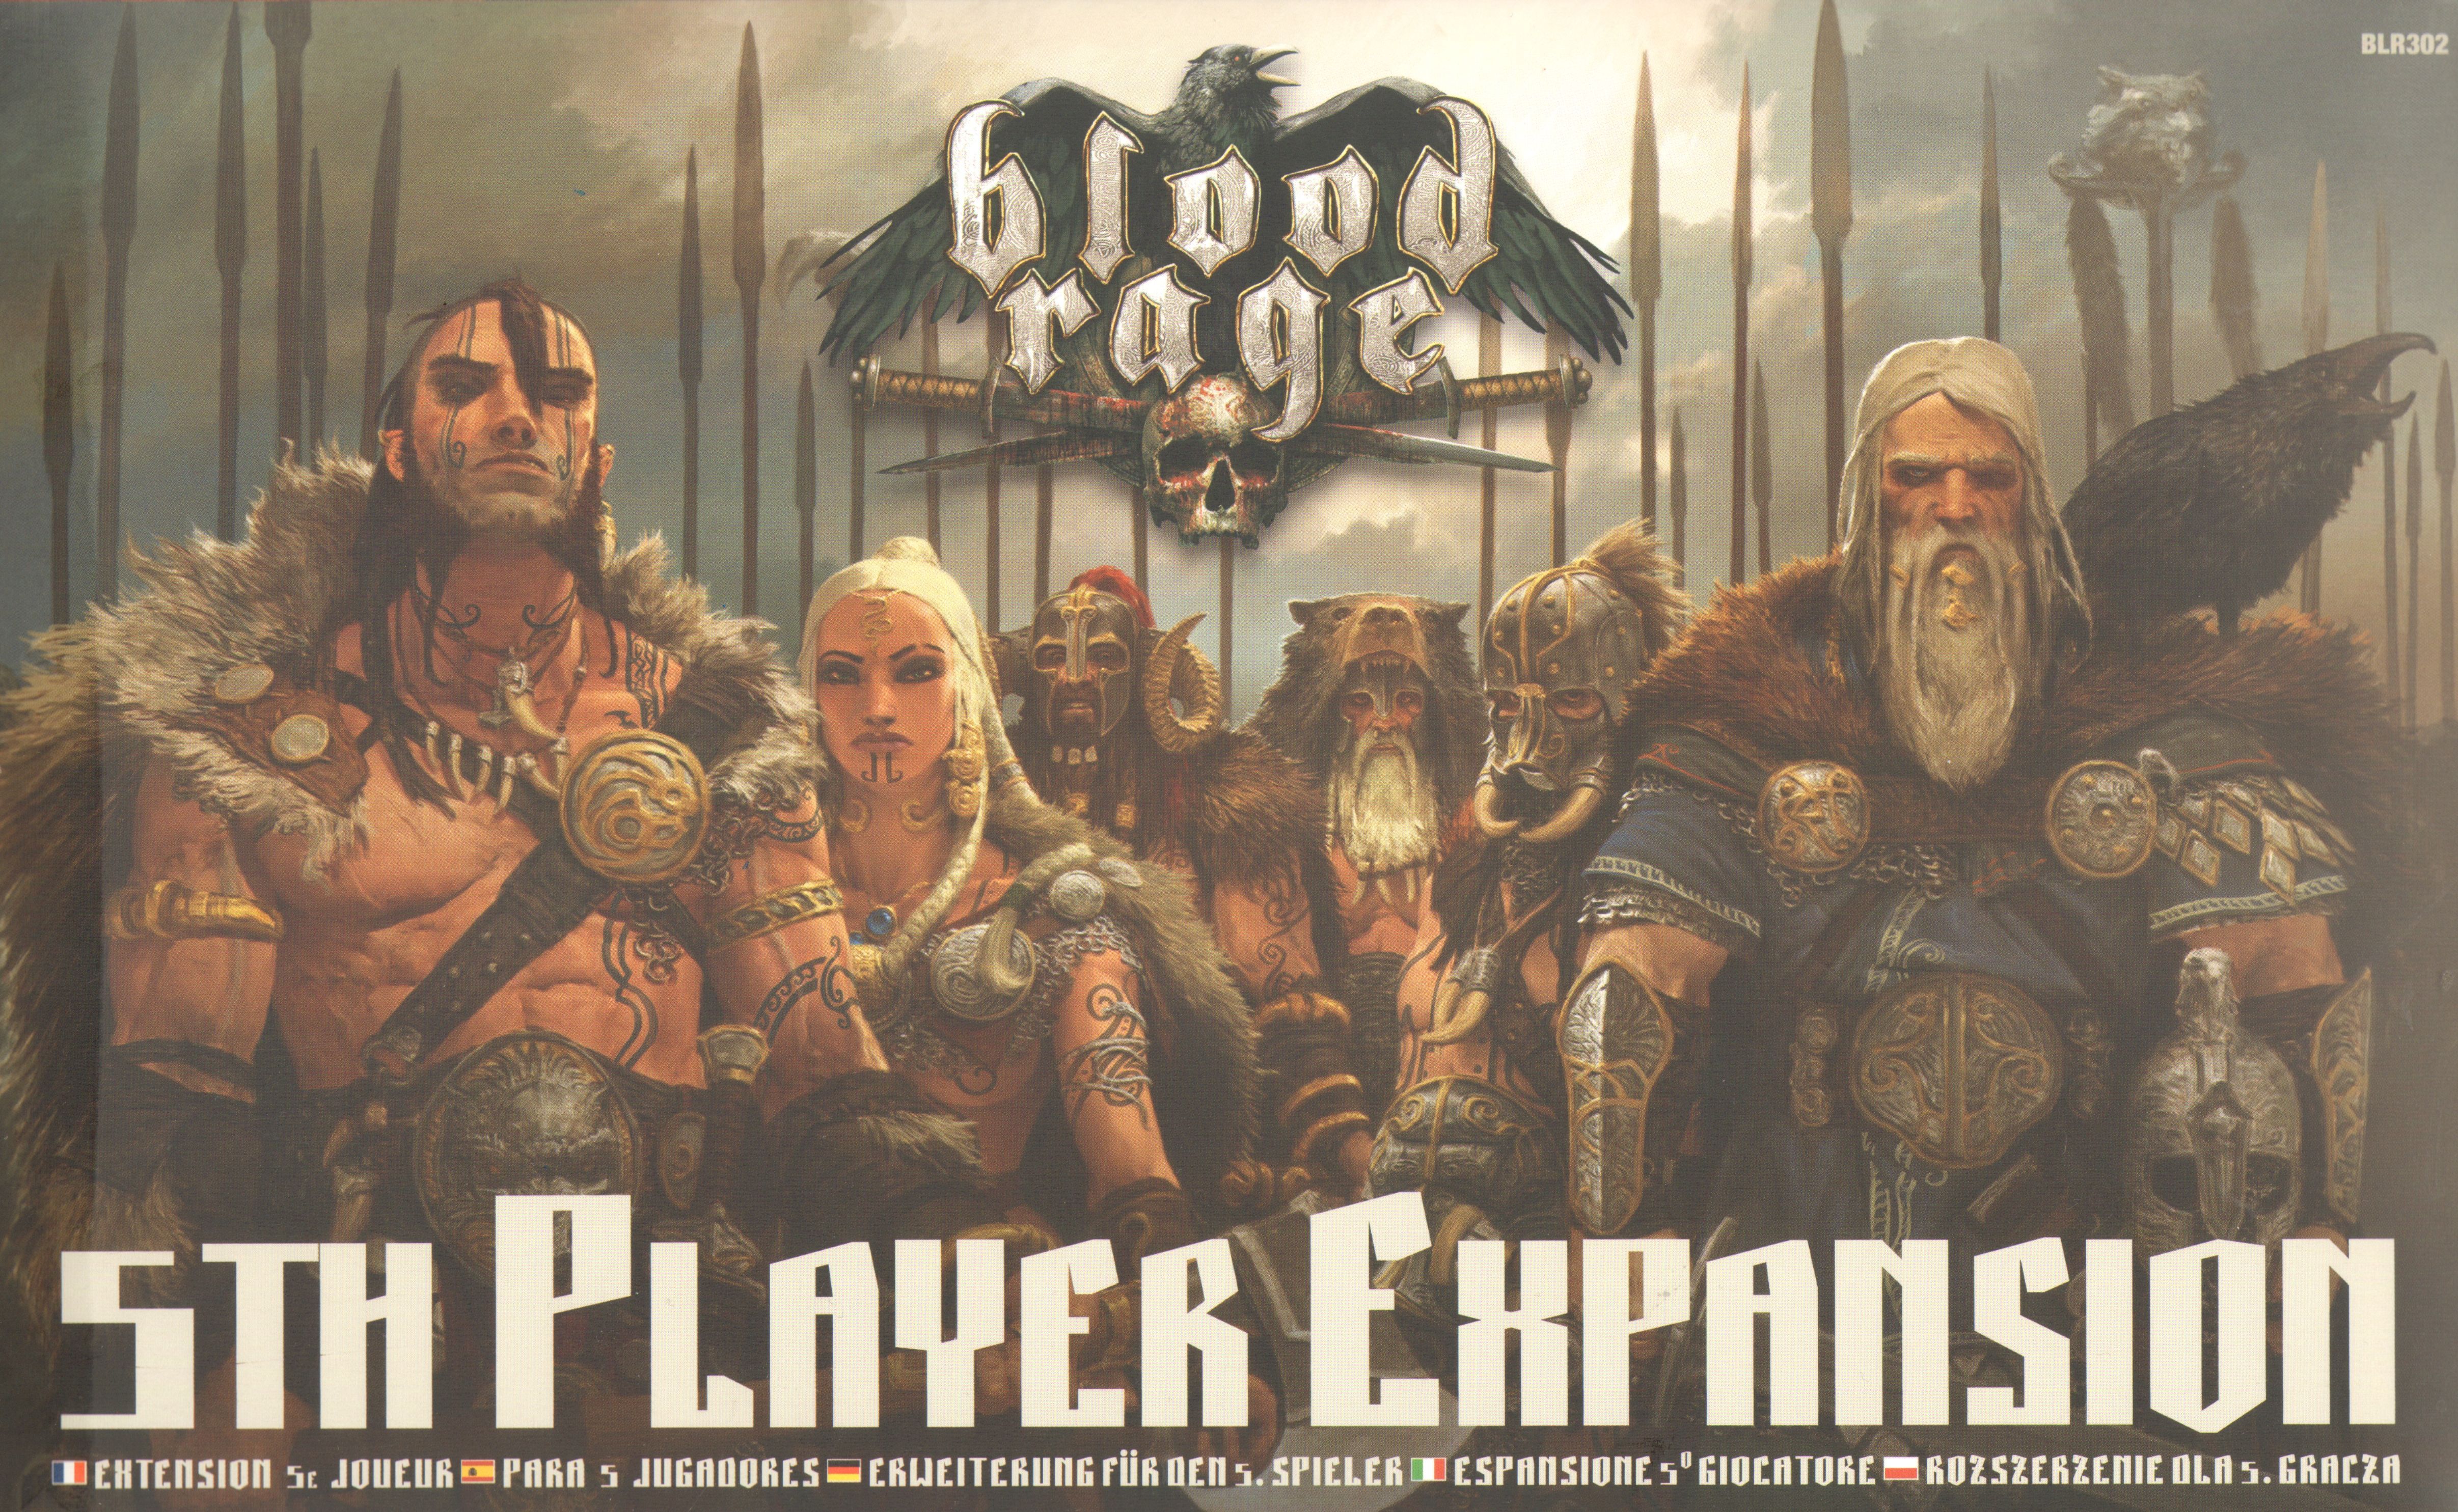 Blood Rage: 5th Player Expansion